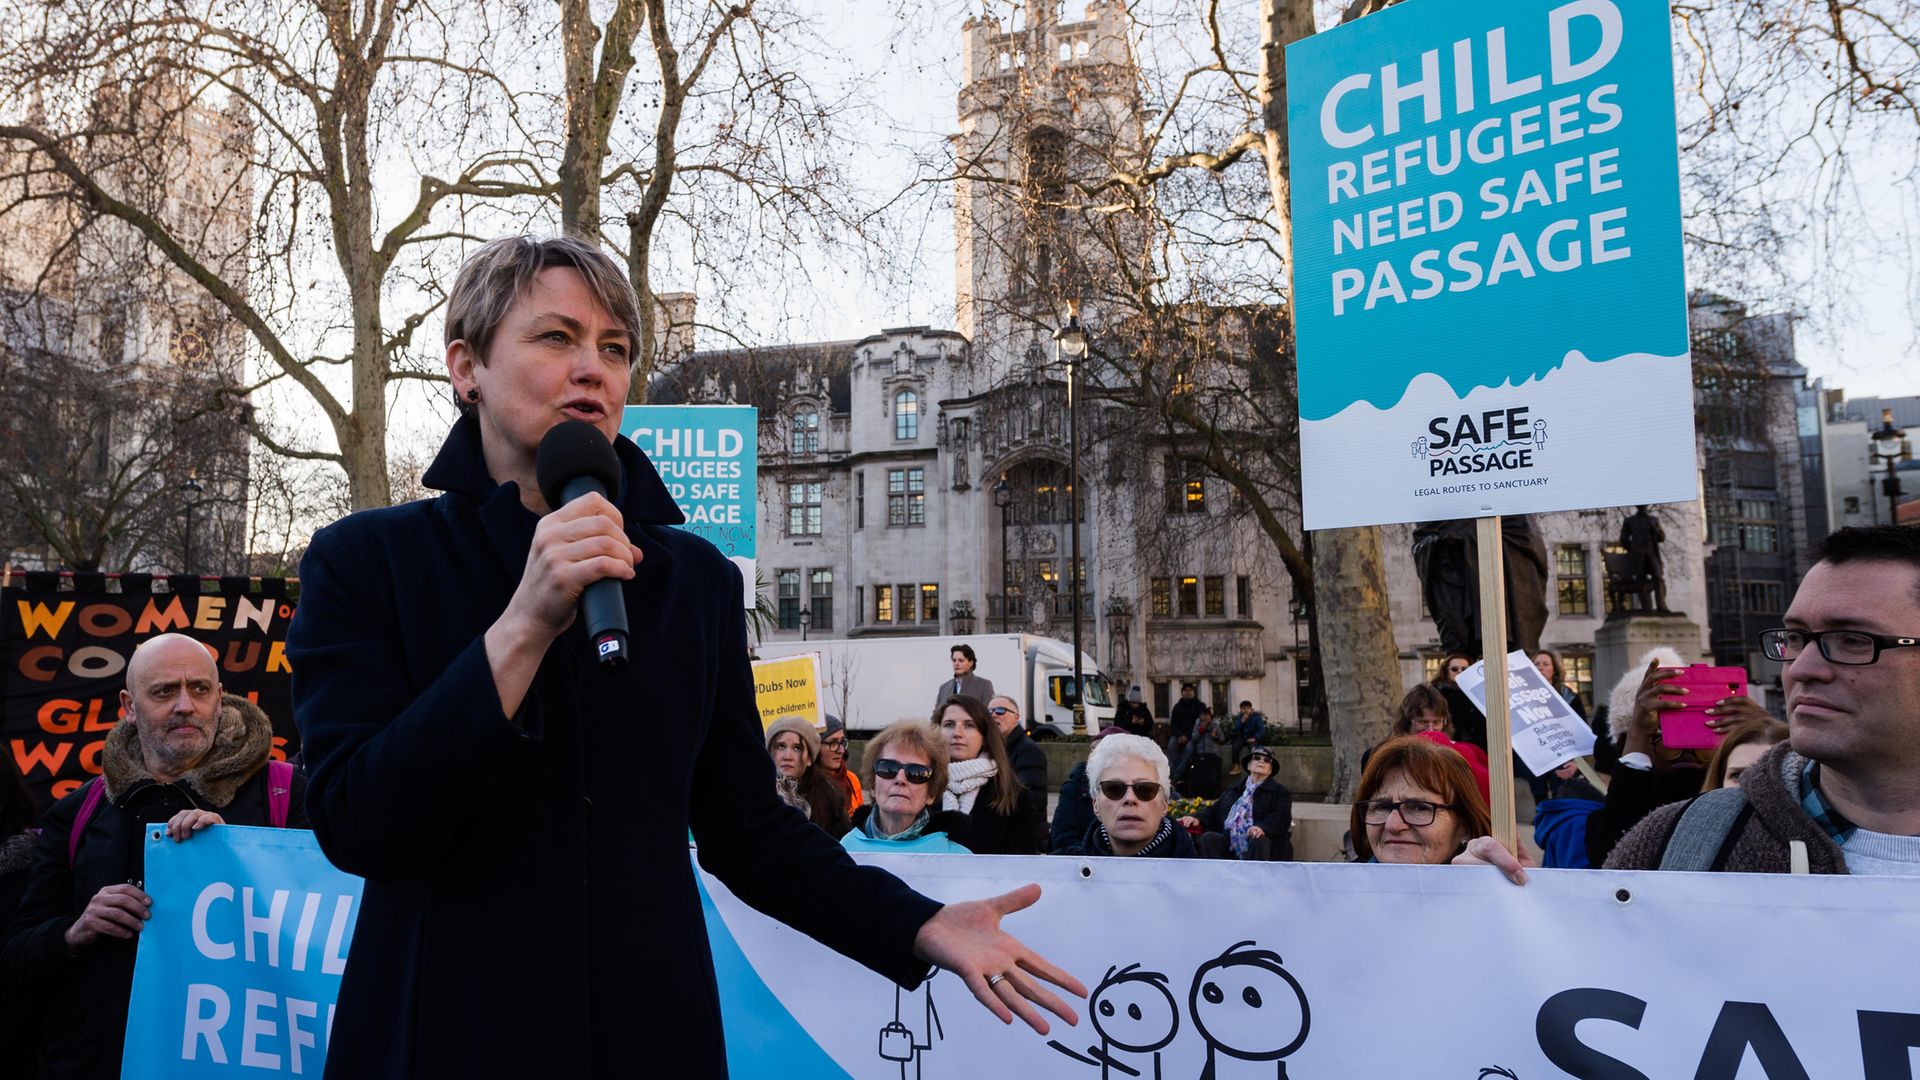 Labour MP Yvette Cooper takes part in a rally in Parliament Square - Credit: NurPhoto via Getty Images